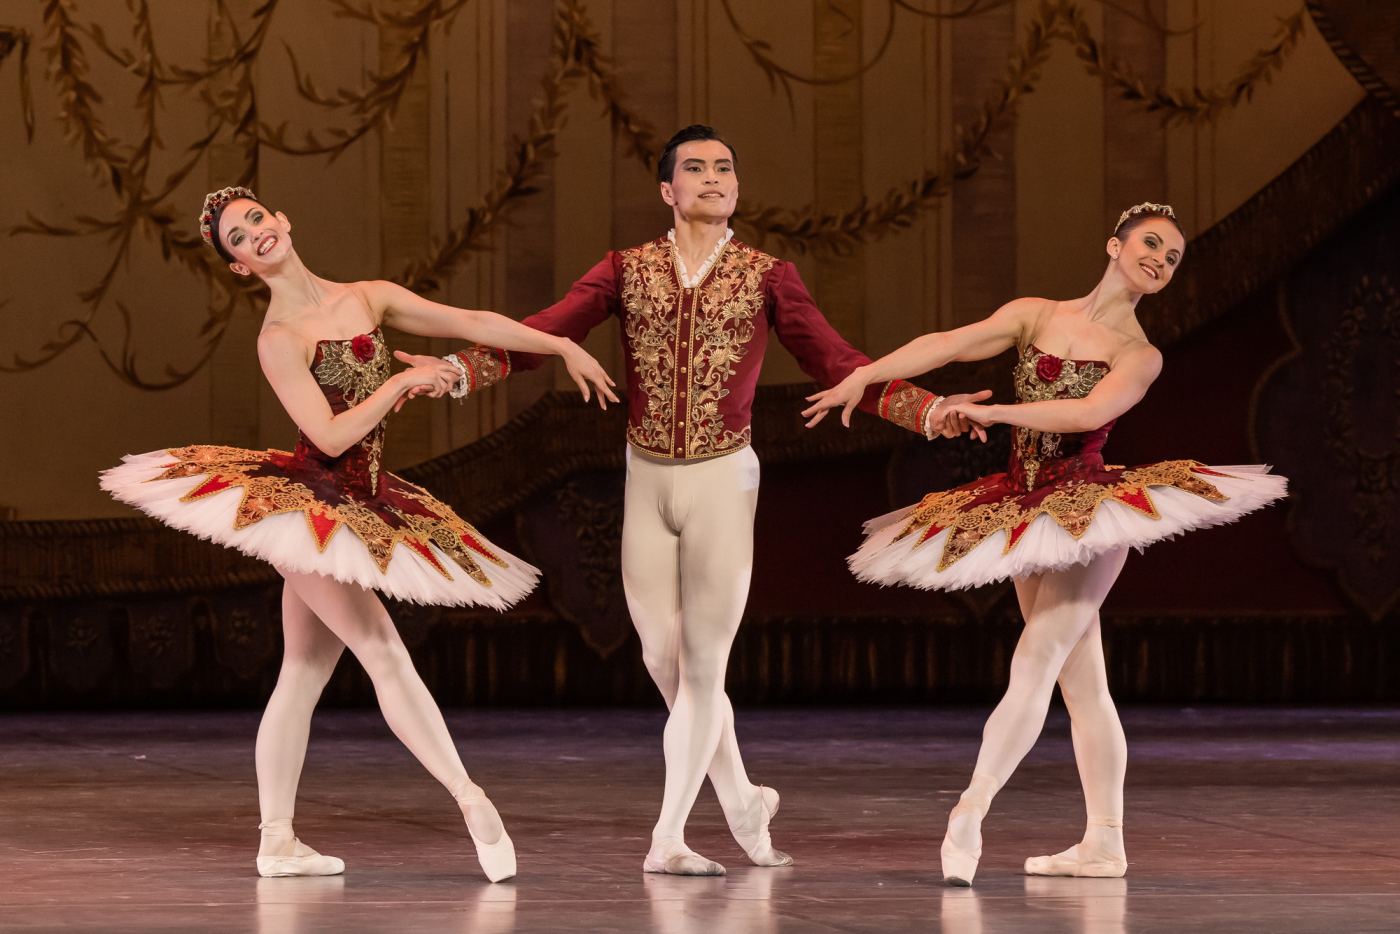 20. L.Felméry, R.Morimoto, and C.Balaban, “Paquita Suite” by T.Solymosi, A.Mirzoyan, and I.Prokofieva after M.Petipa; Ballet of the Hungarian State Opera 2022 © A.Nagy / Hungarian State Opera 